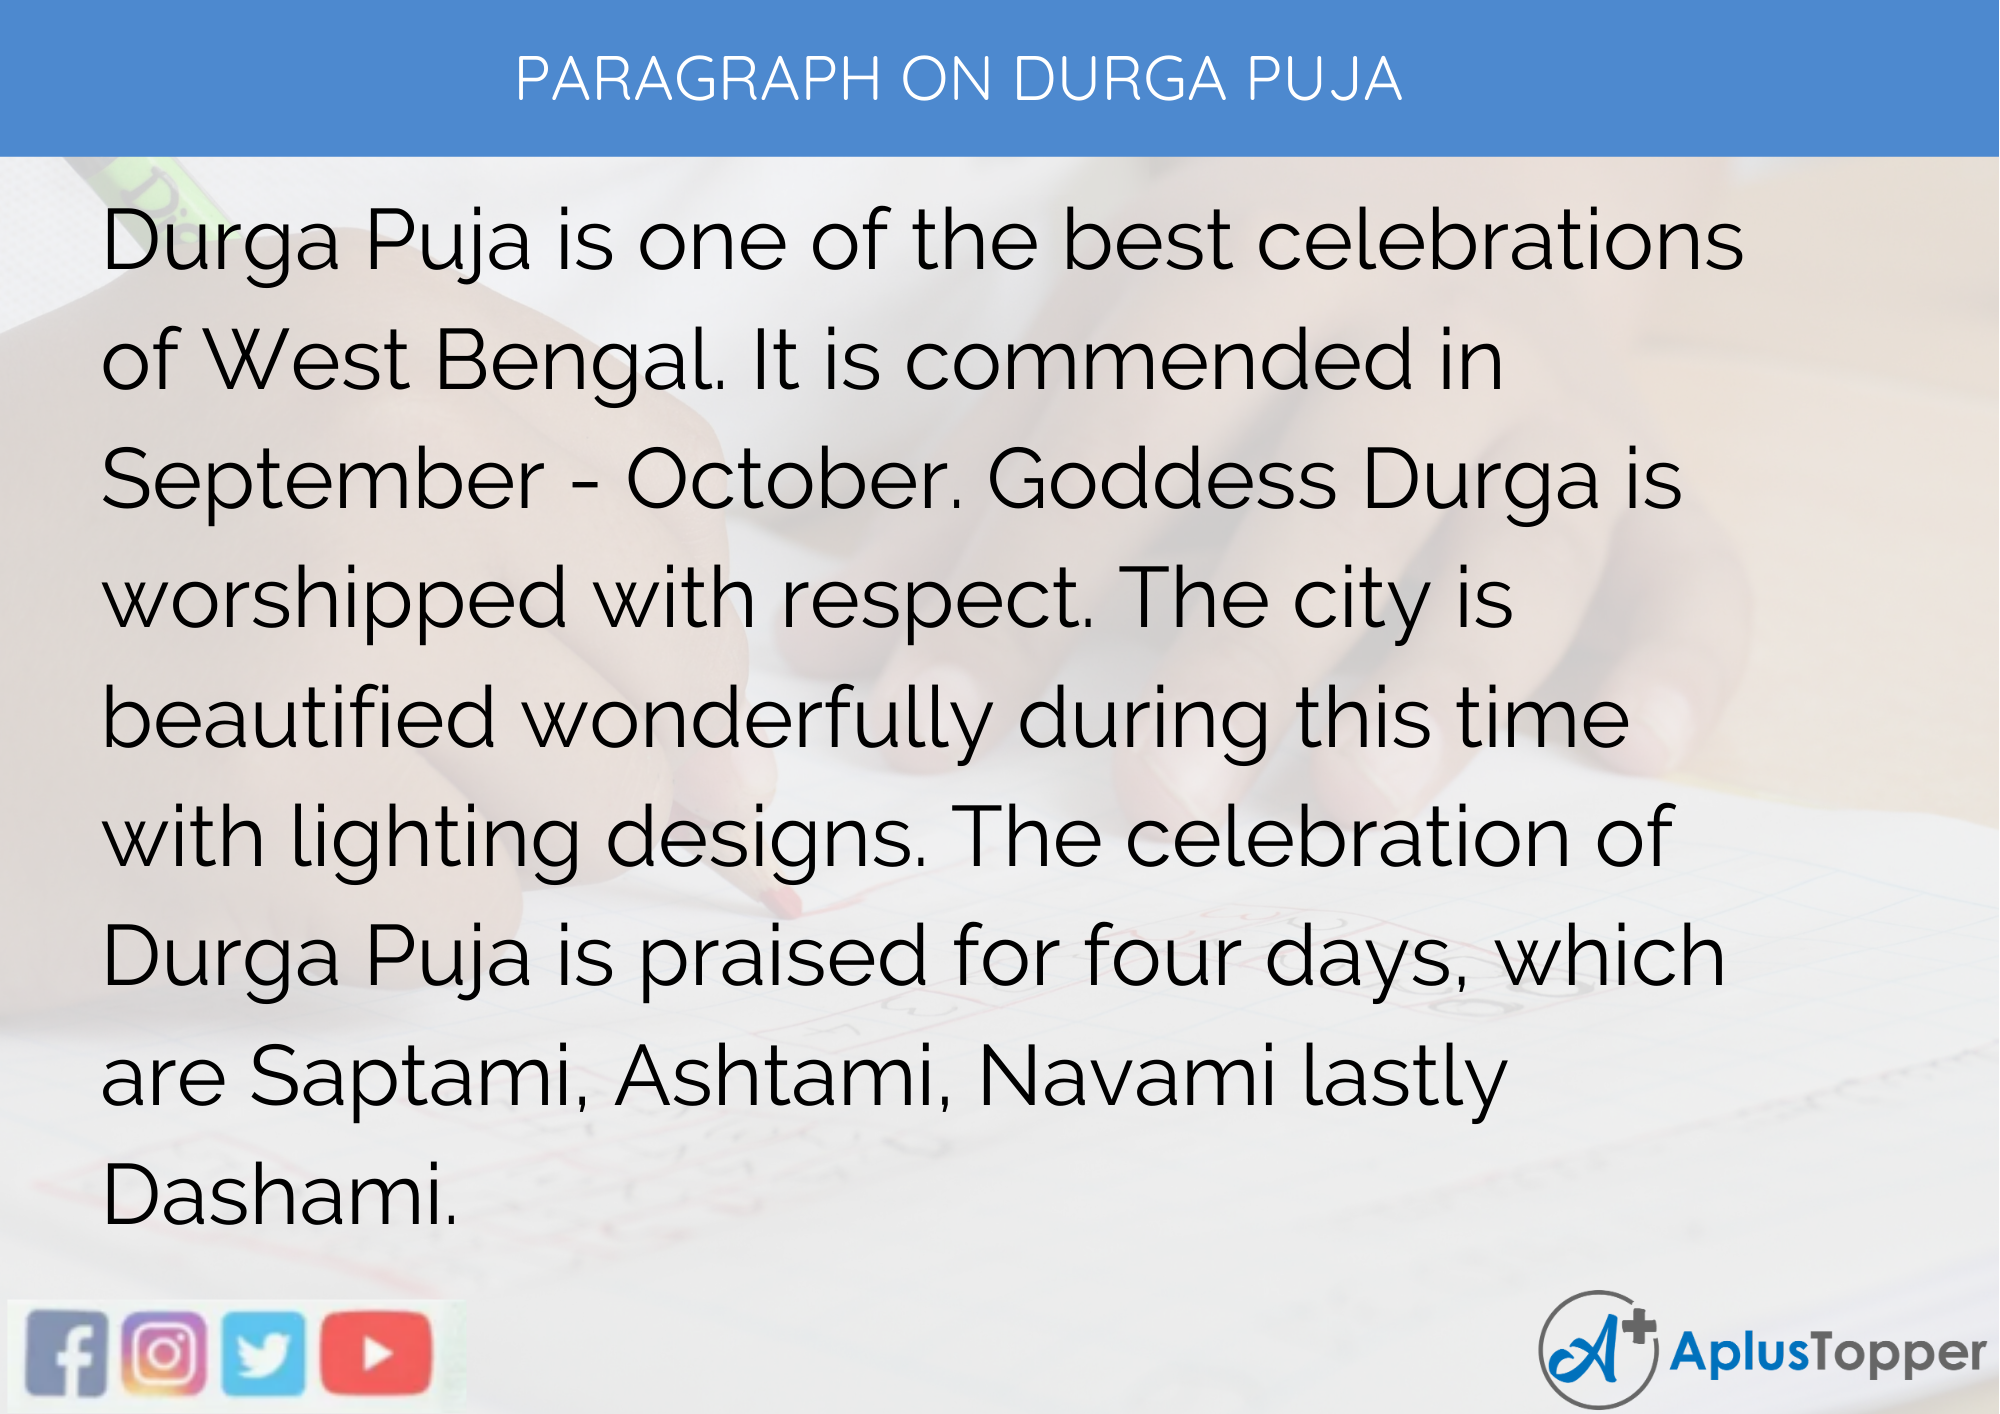 Paragraph On Durga Puja For Classes 9, 10, 11, 12 And Competitive Exams